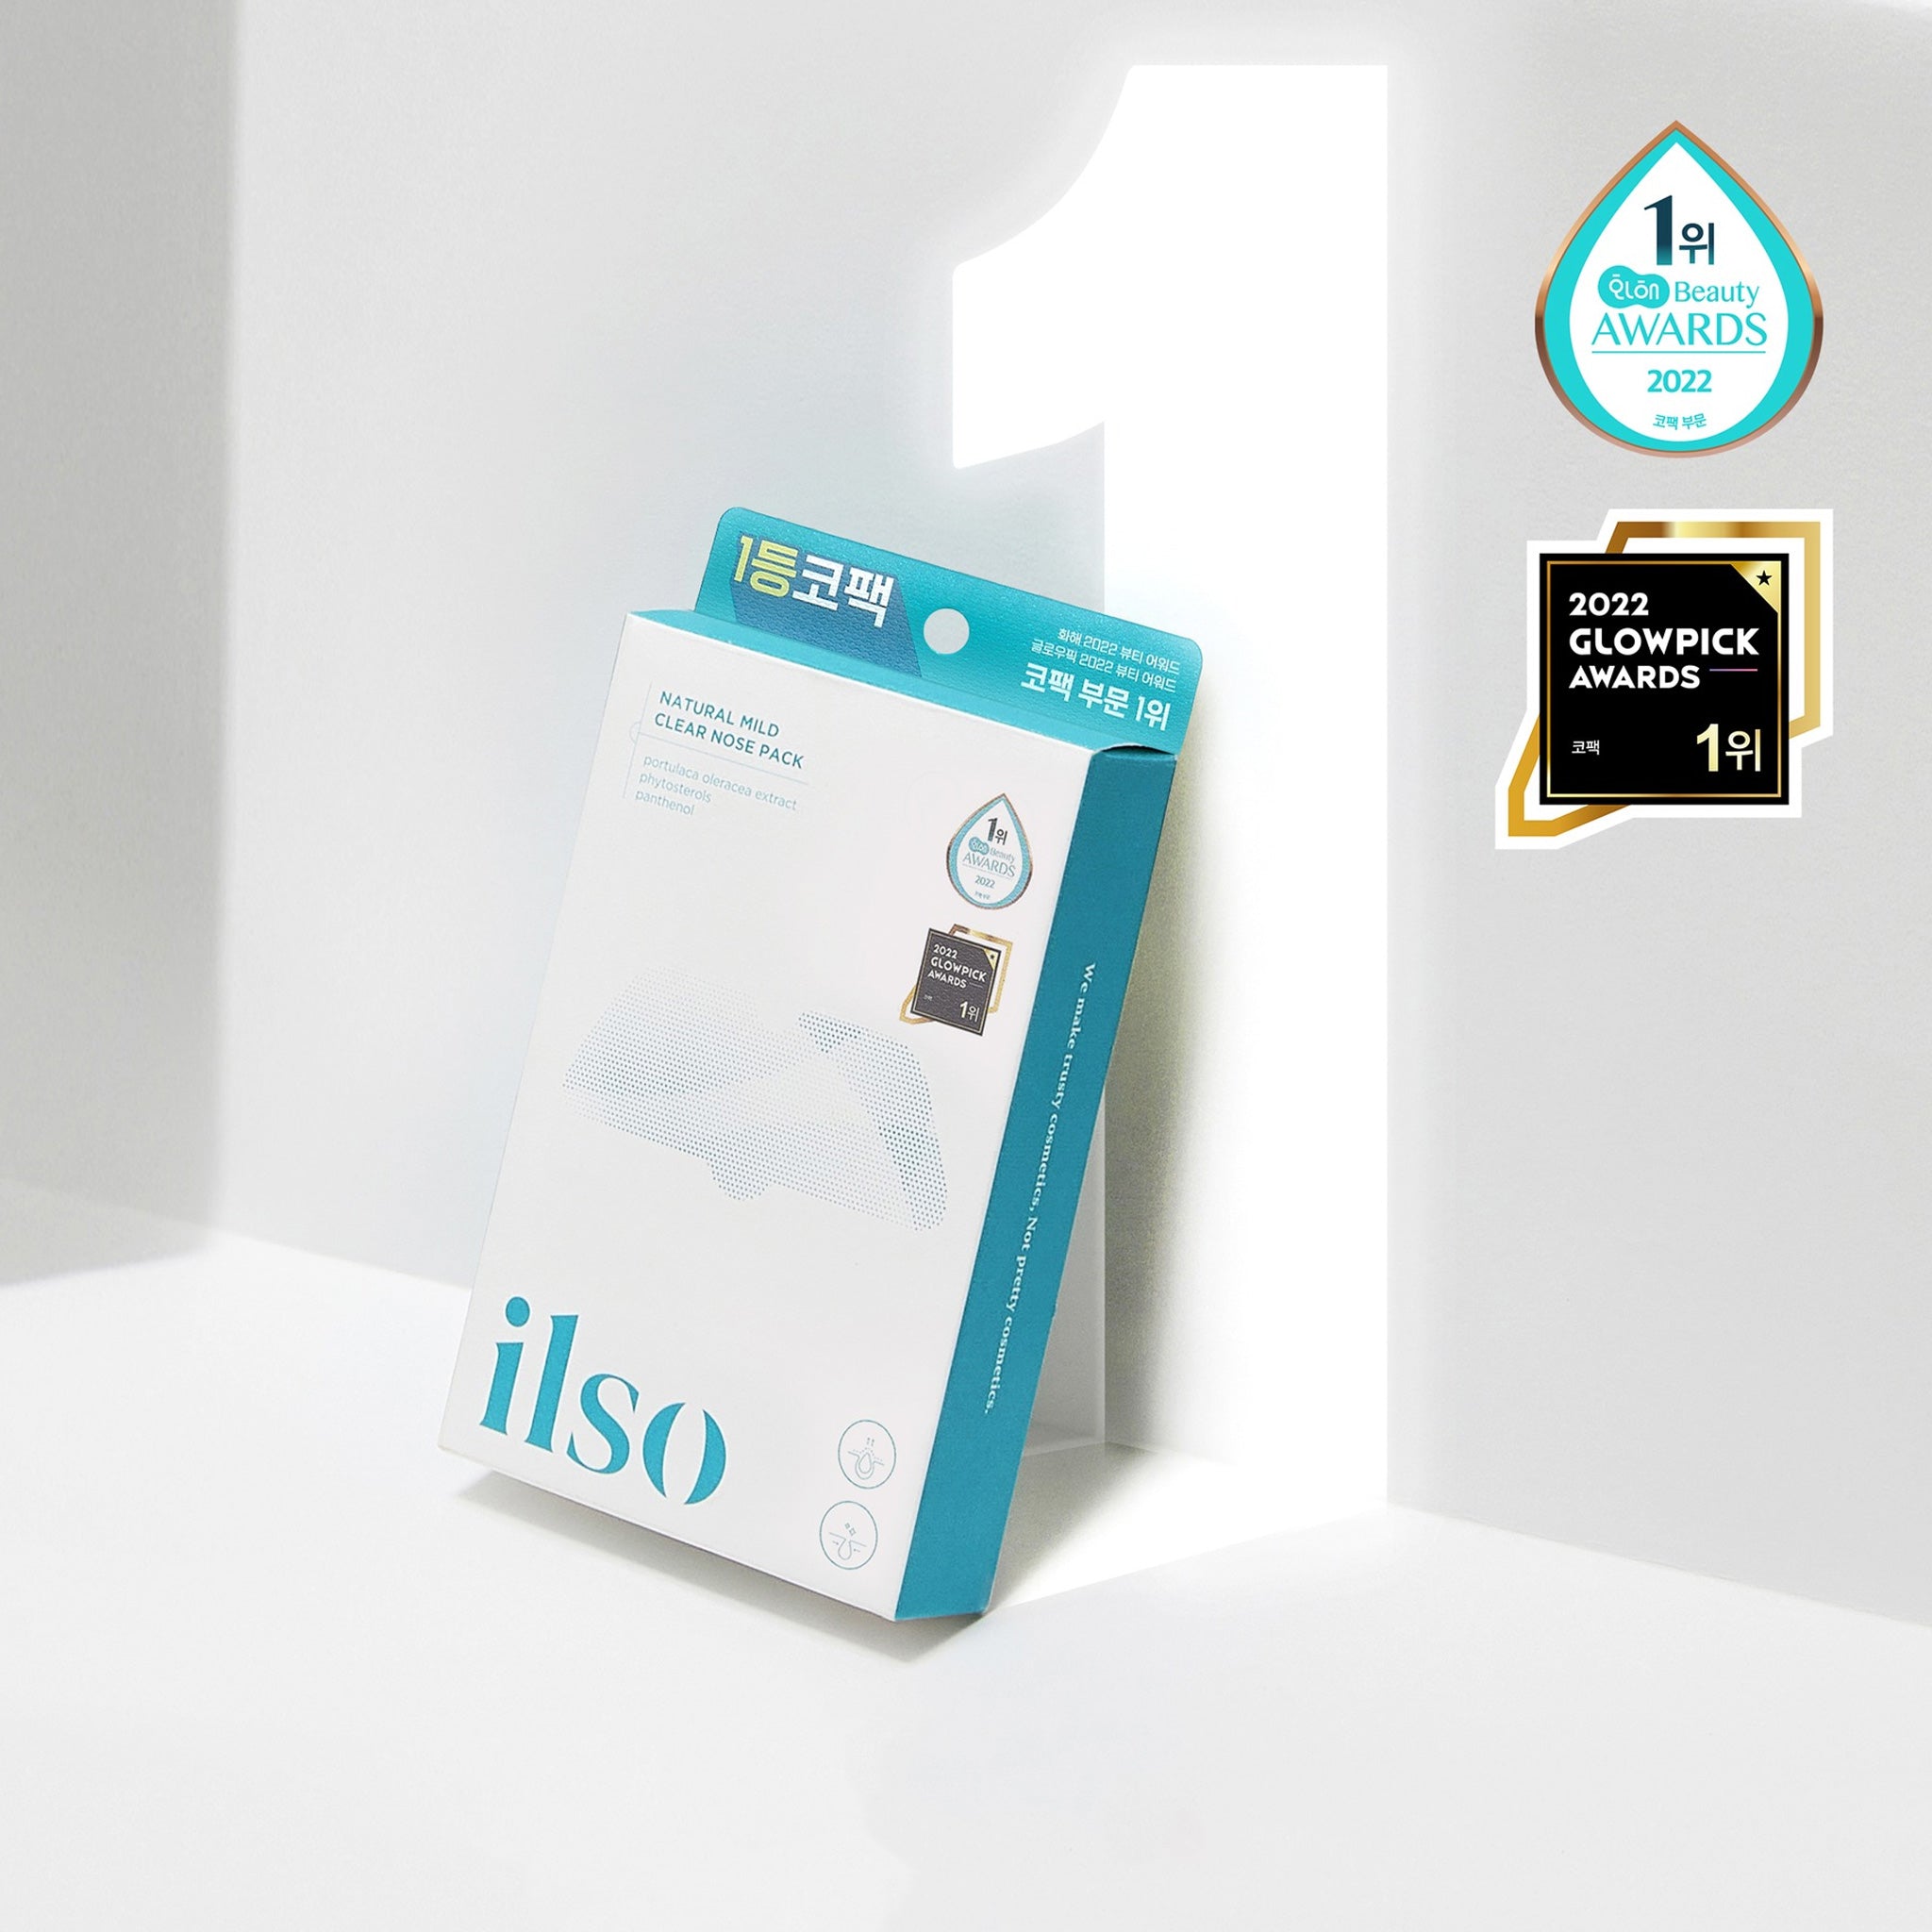 ilso Natural Mild Clear Nose Pack 5ea